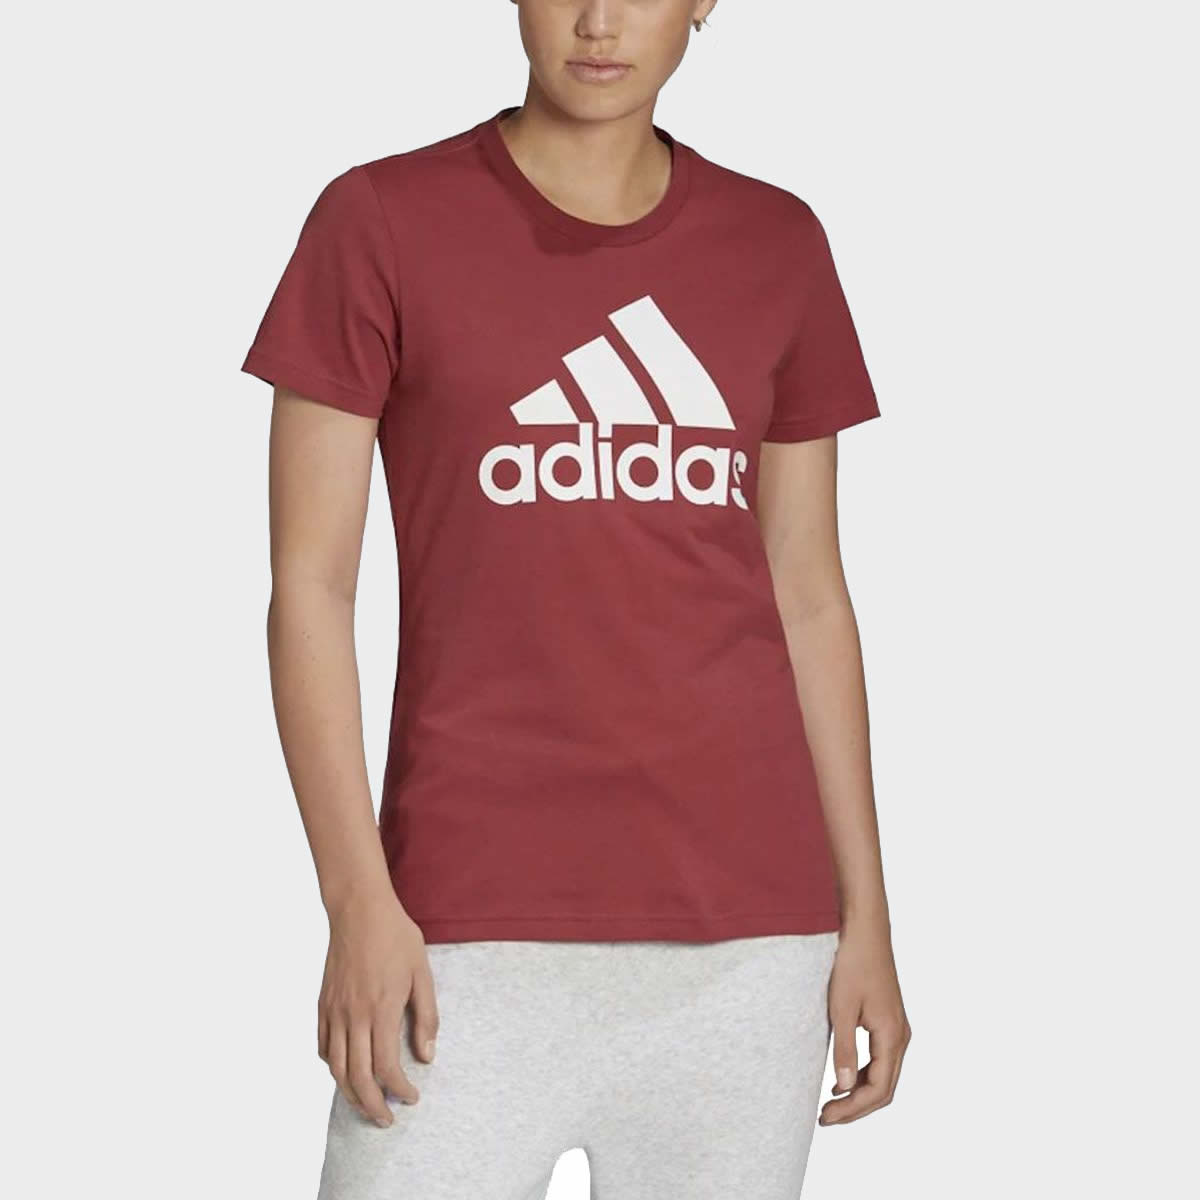 tradesports.co.uk Adidas Women's Must Haves Badge of Sports T-Shirt GC6961